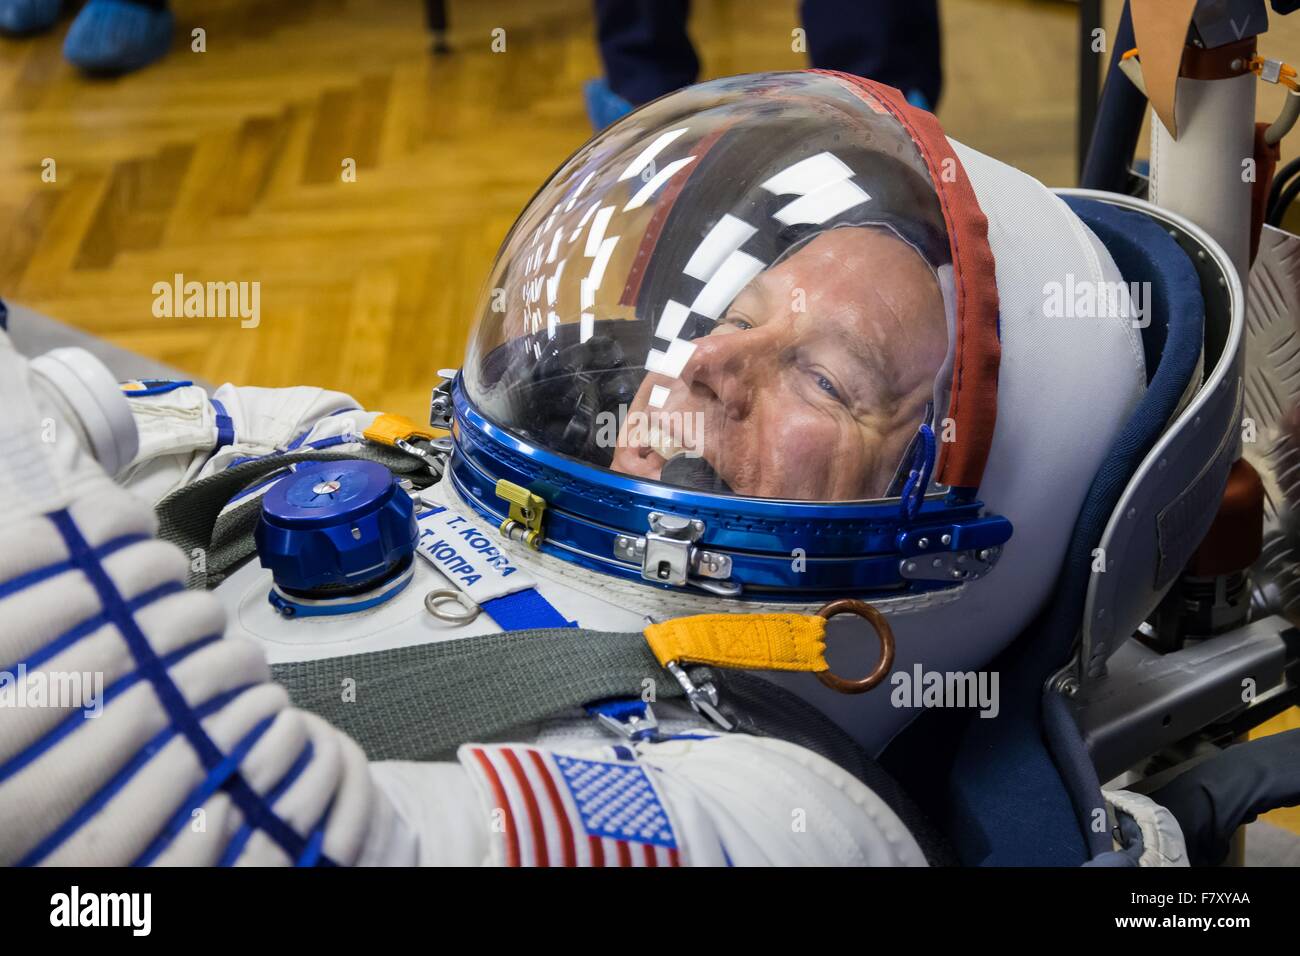 International Space Station Expedition 46 crew member European Space Agency astronaut Tim Peake is fitted into his Russian Sokol spacesuit at the Gagarin Space Center December 1, 2015 in Star City, Russia. The Expedition 46 crew launch December 15 for a six-month mission on the International Space Station. Stock Photo